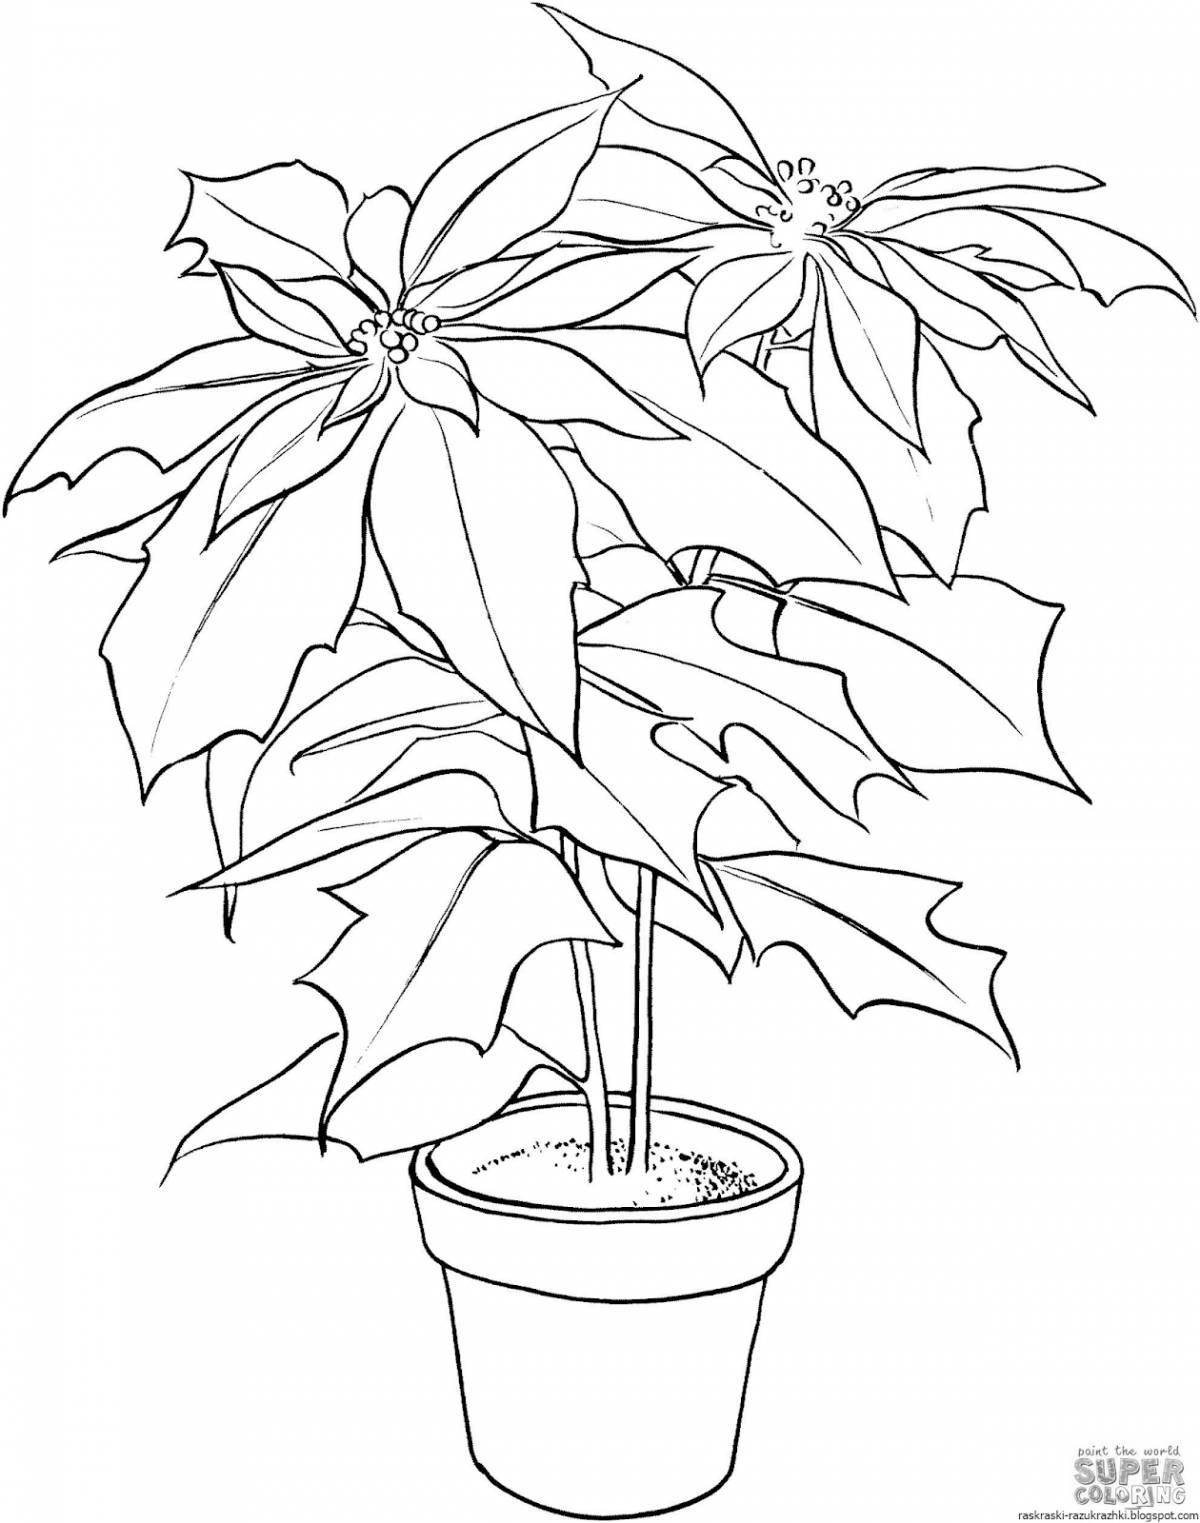 Coloring book shiny indoor flower